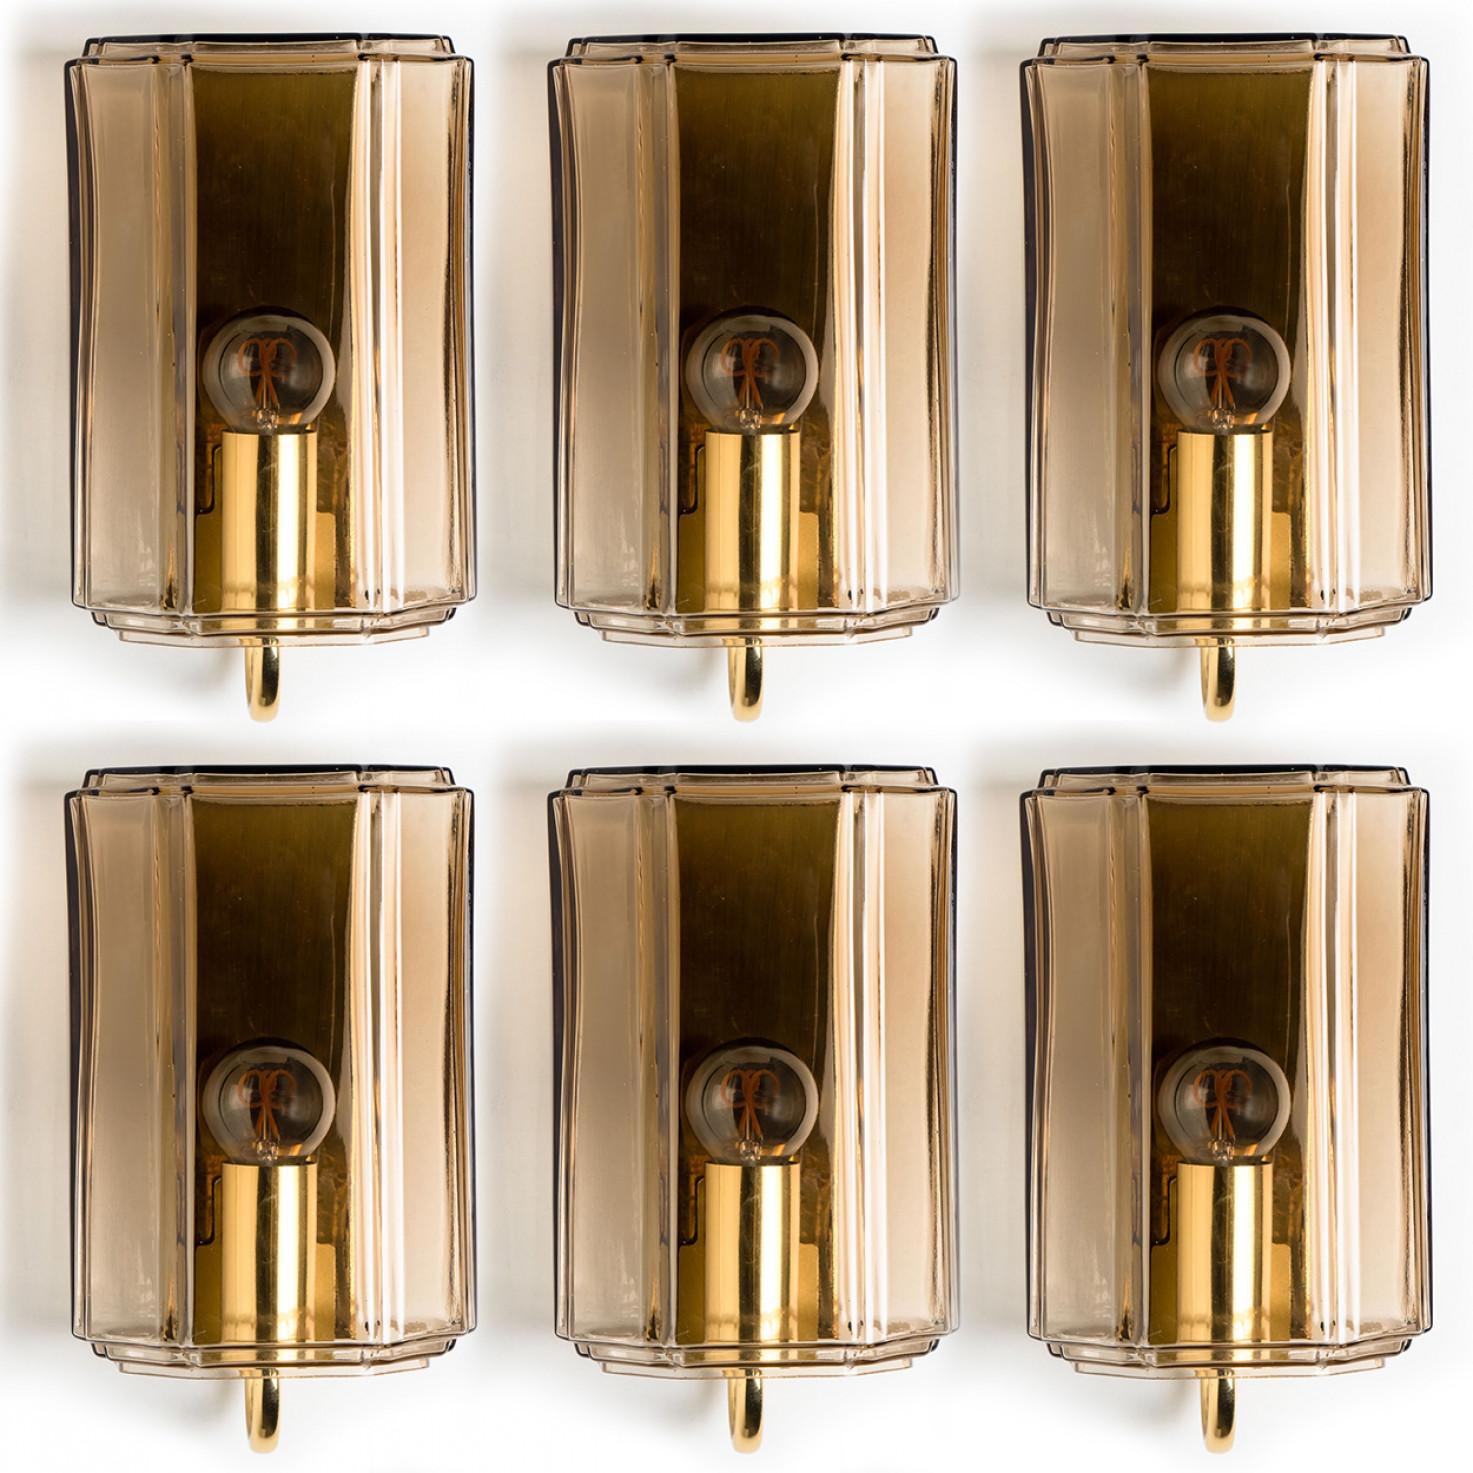 These beautiful hand blown glass wall lights were manufactured by Glashütte Limburg in Germany during the 1960s (late 1960s-early 1970s). Beautiful craftsmanship. These mid century vintage lights feature handmade, elaborate smoked glass with brass